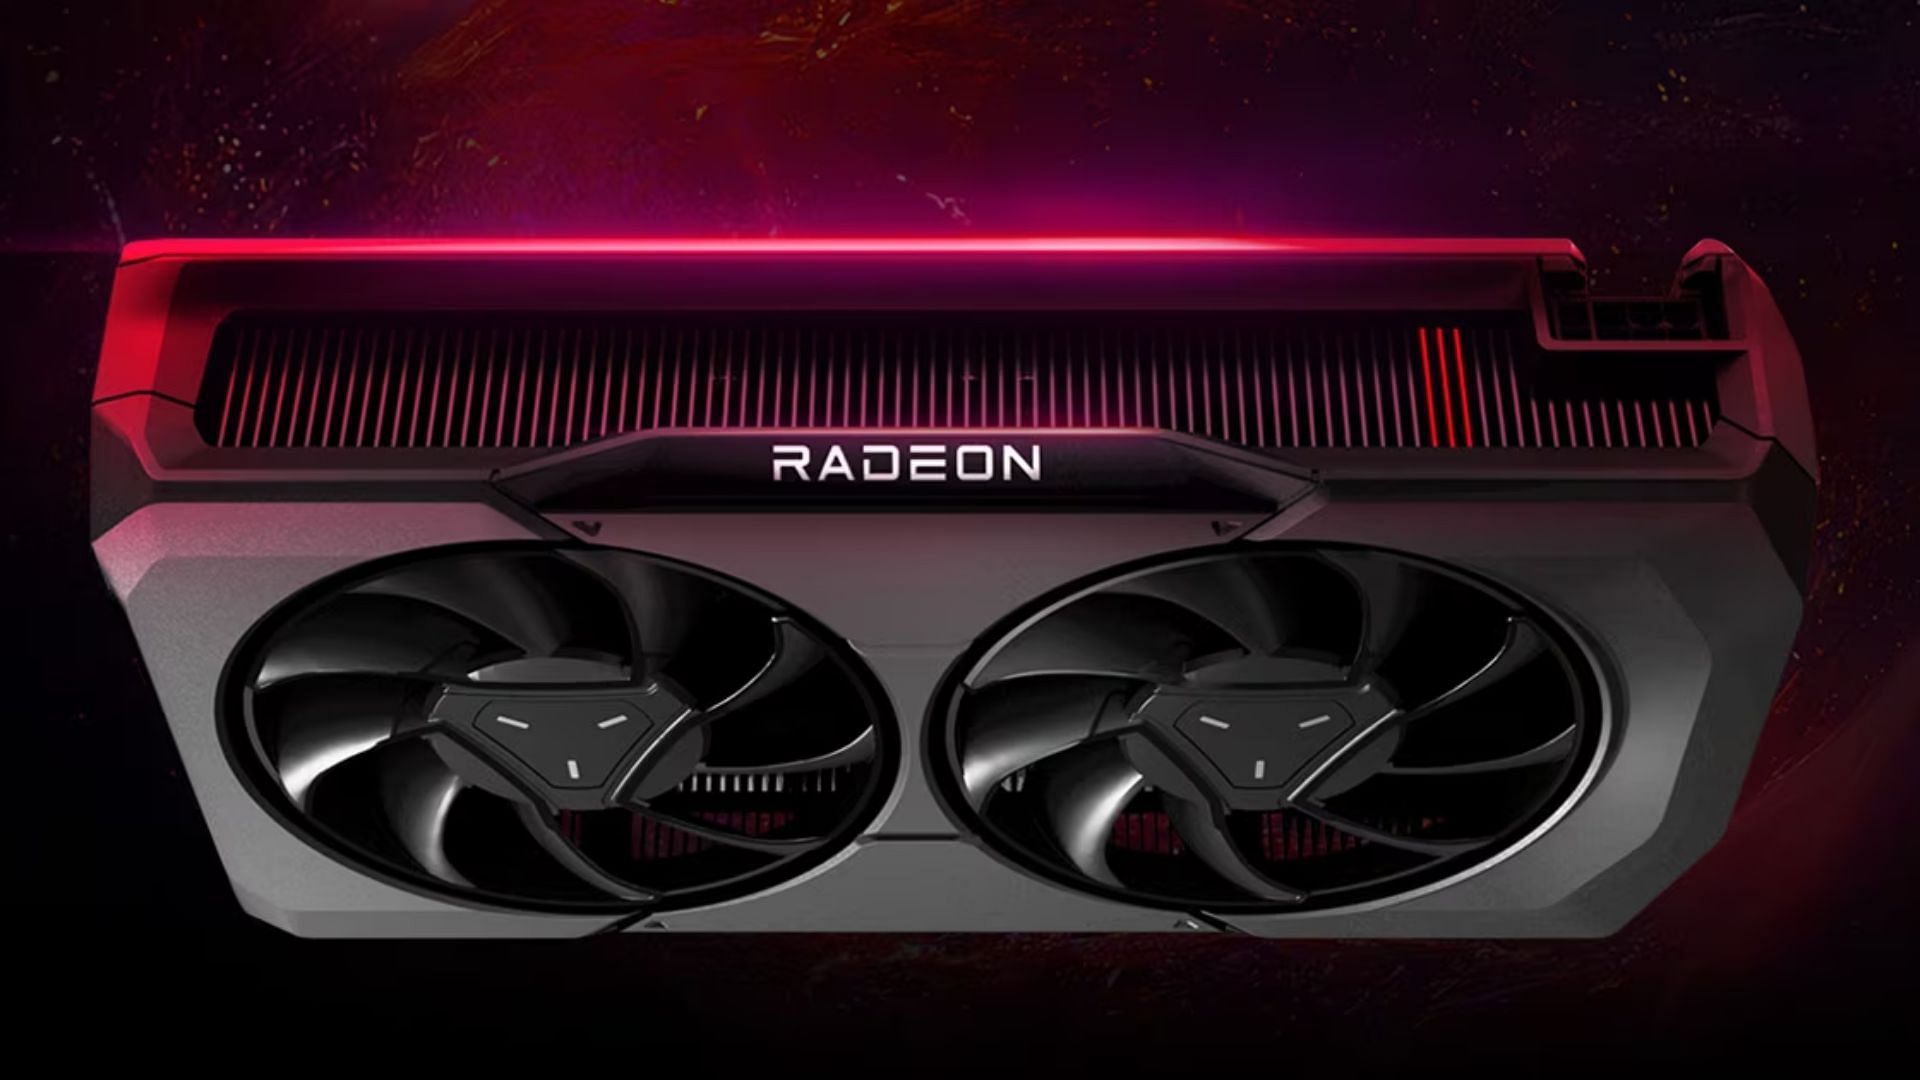 The AMD Radeon RX 7600 is one of the latest budget GPUs from Team Red. (Image via AMD)